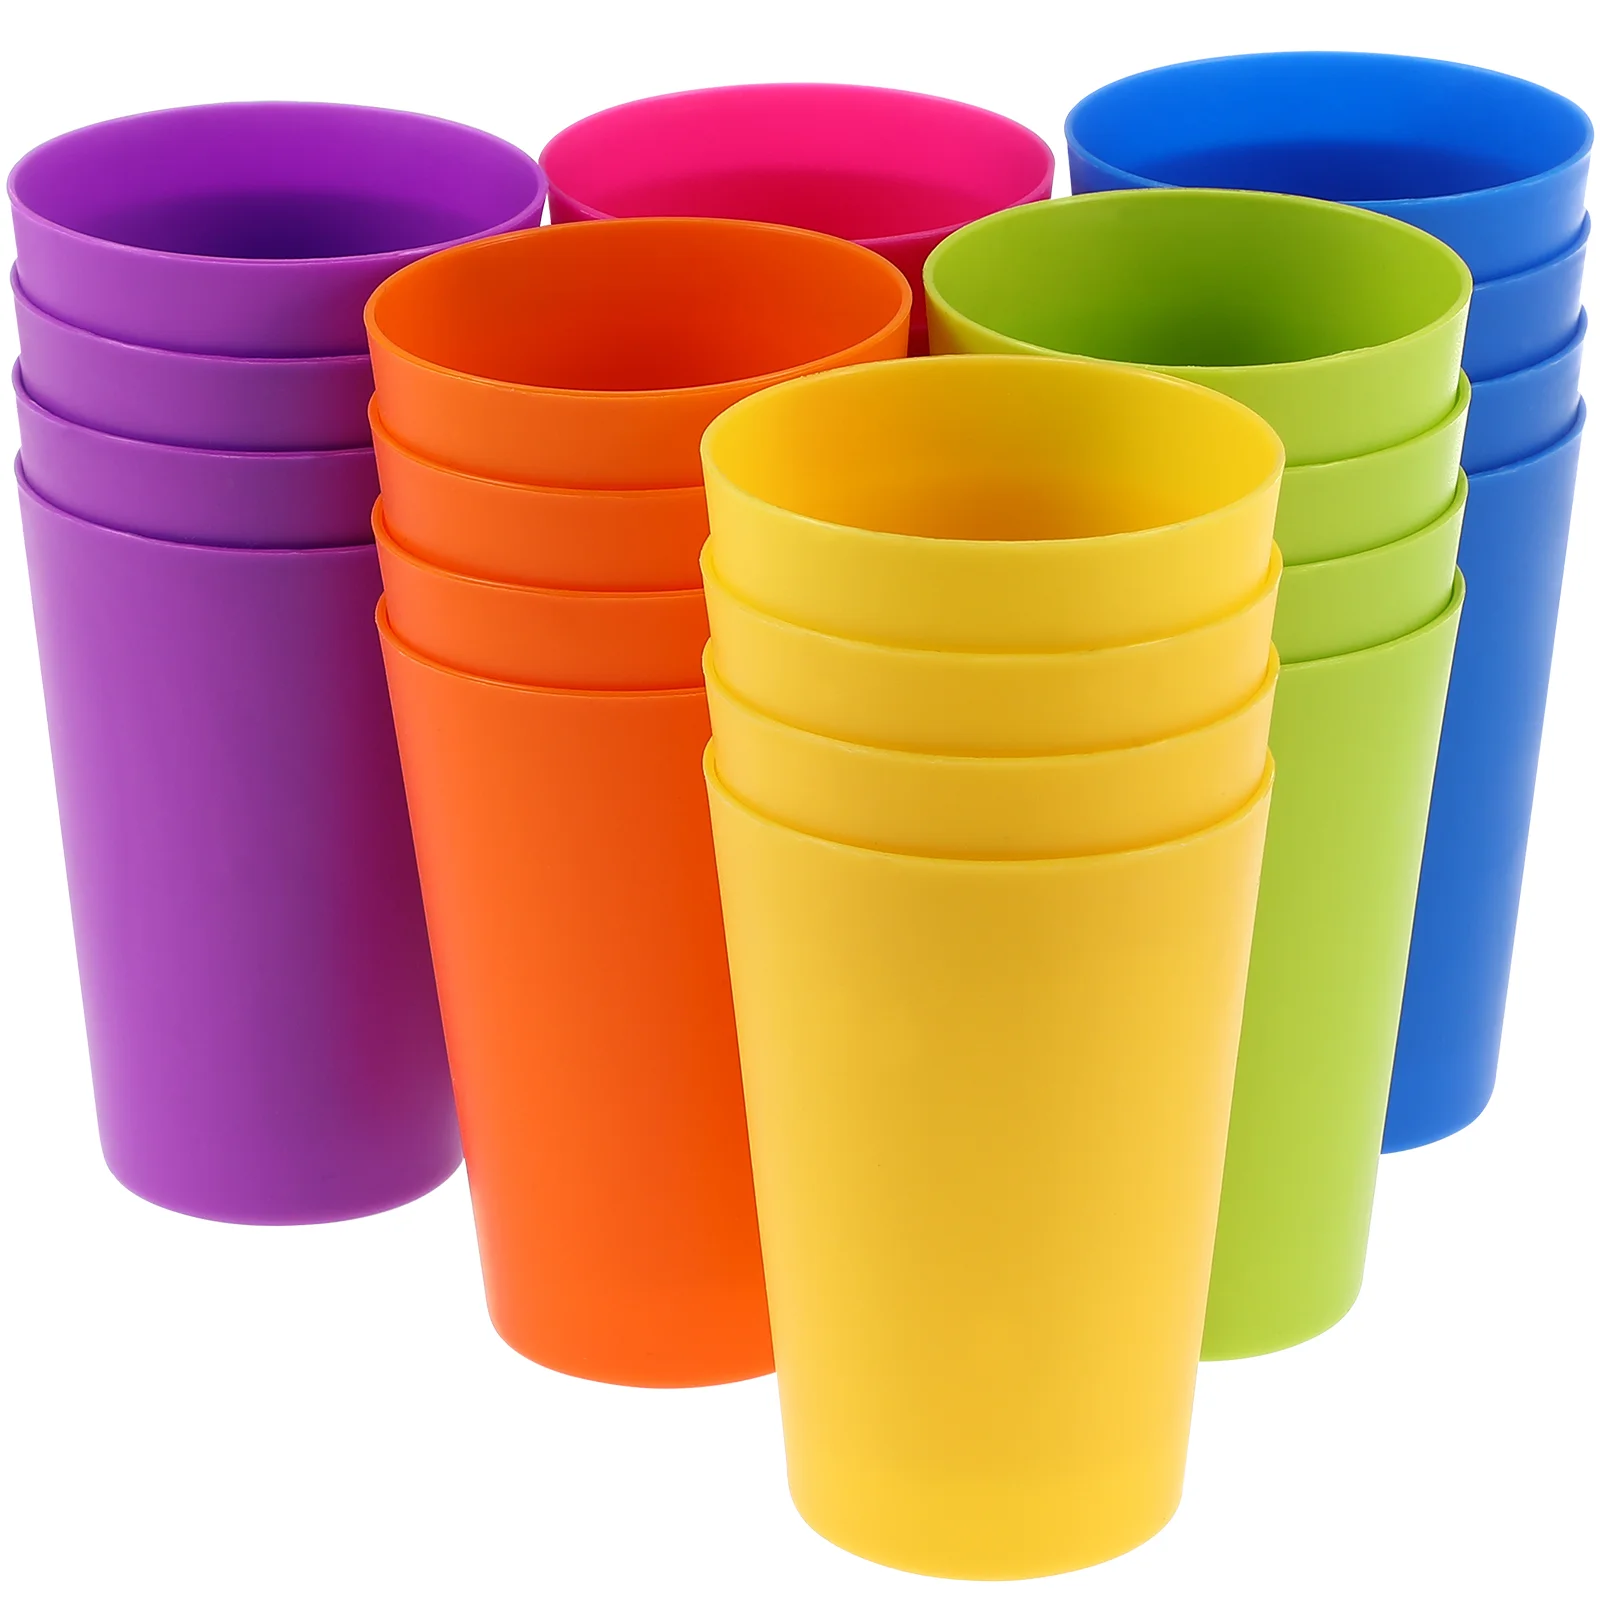 

24 Pcs Plastic Drinking Cups Plastic Colorful Beverage Cups for Bear Party Favors Disposable